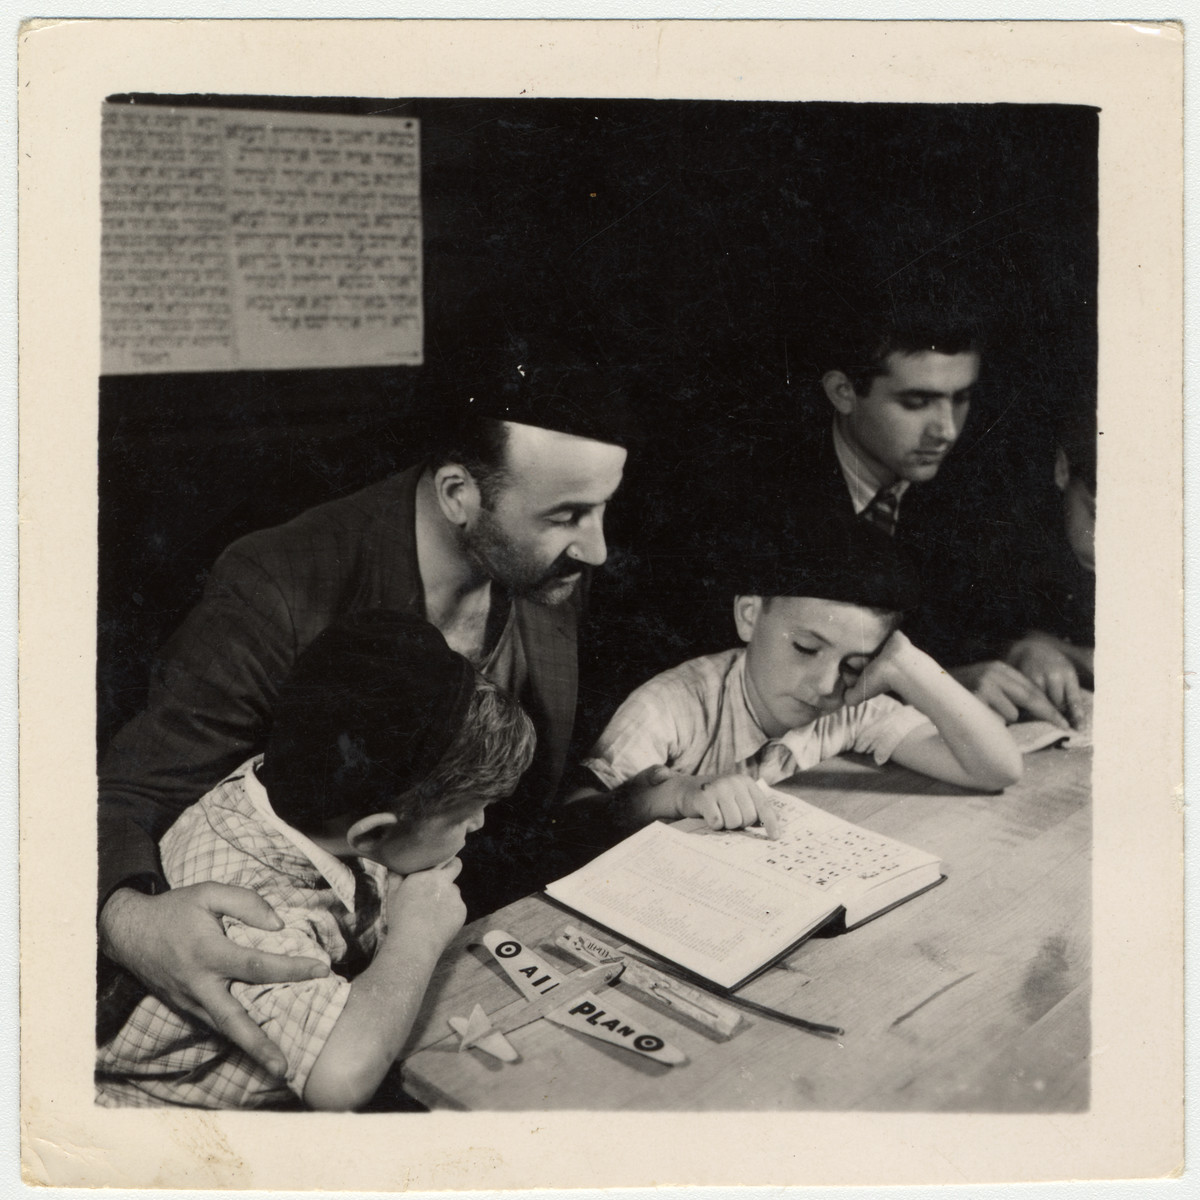 Buchenwald child survivor study a Hebrew text at an OSE (Oeuvre de Secours aux Enfants) children's home in France [either in Ambloy or Taverny].

Among those pictured is David Perelmutter who was born on January 8, 1937 in Lodz.